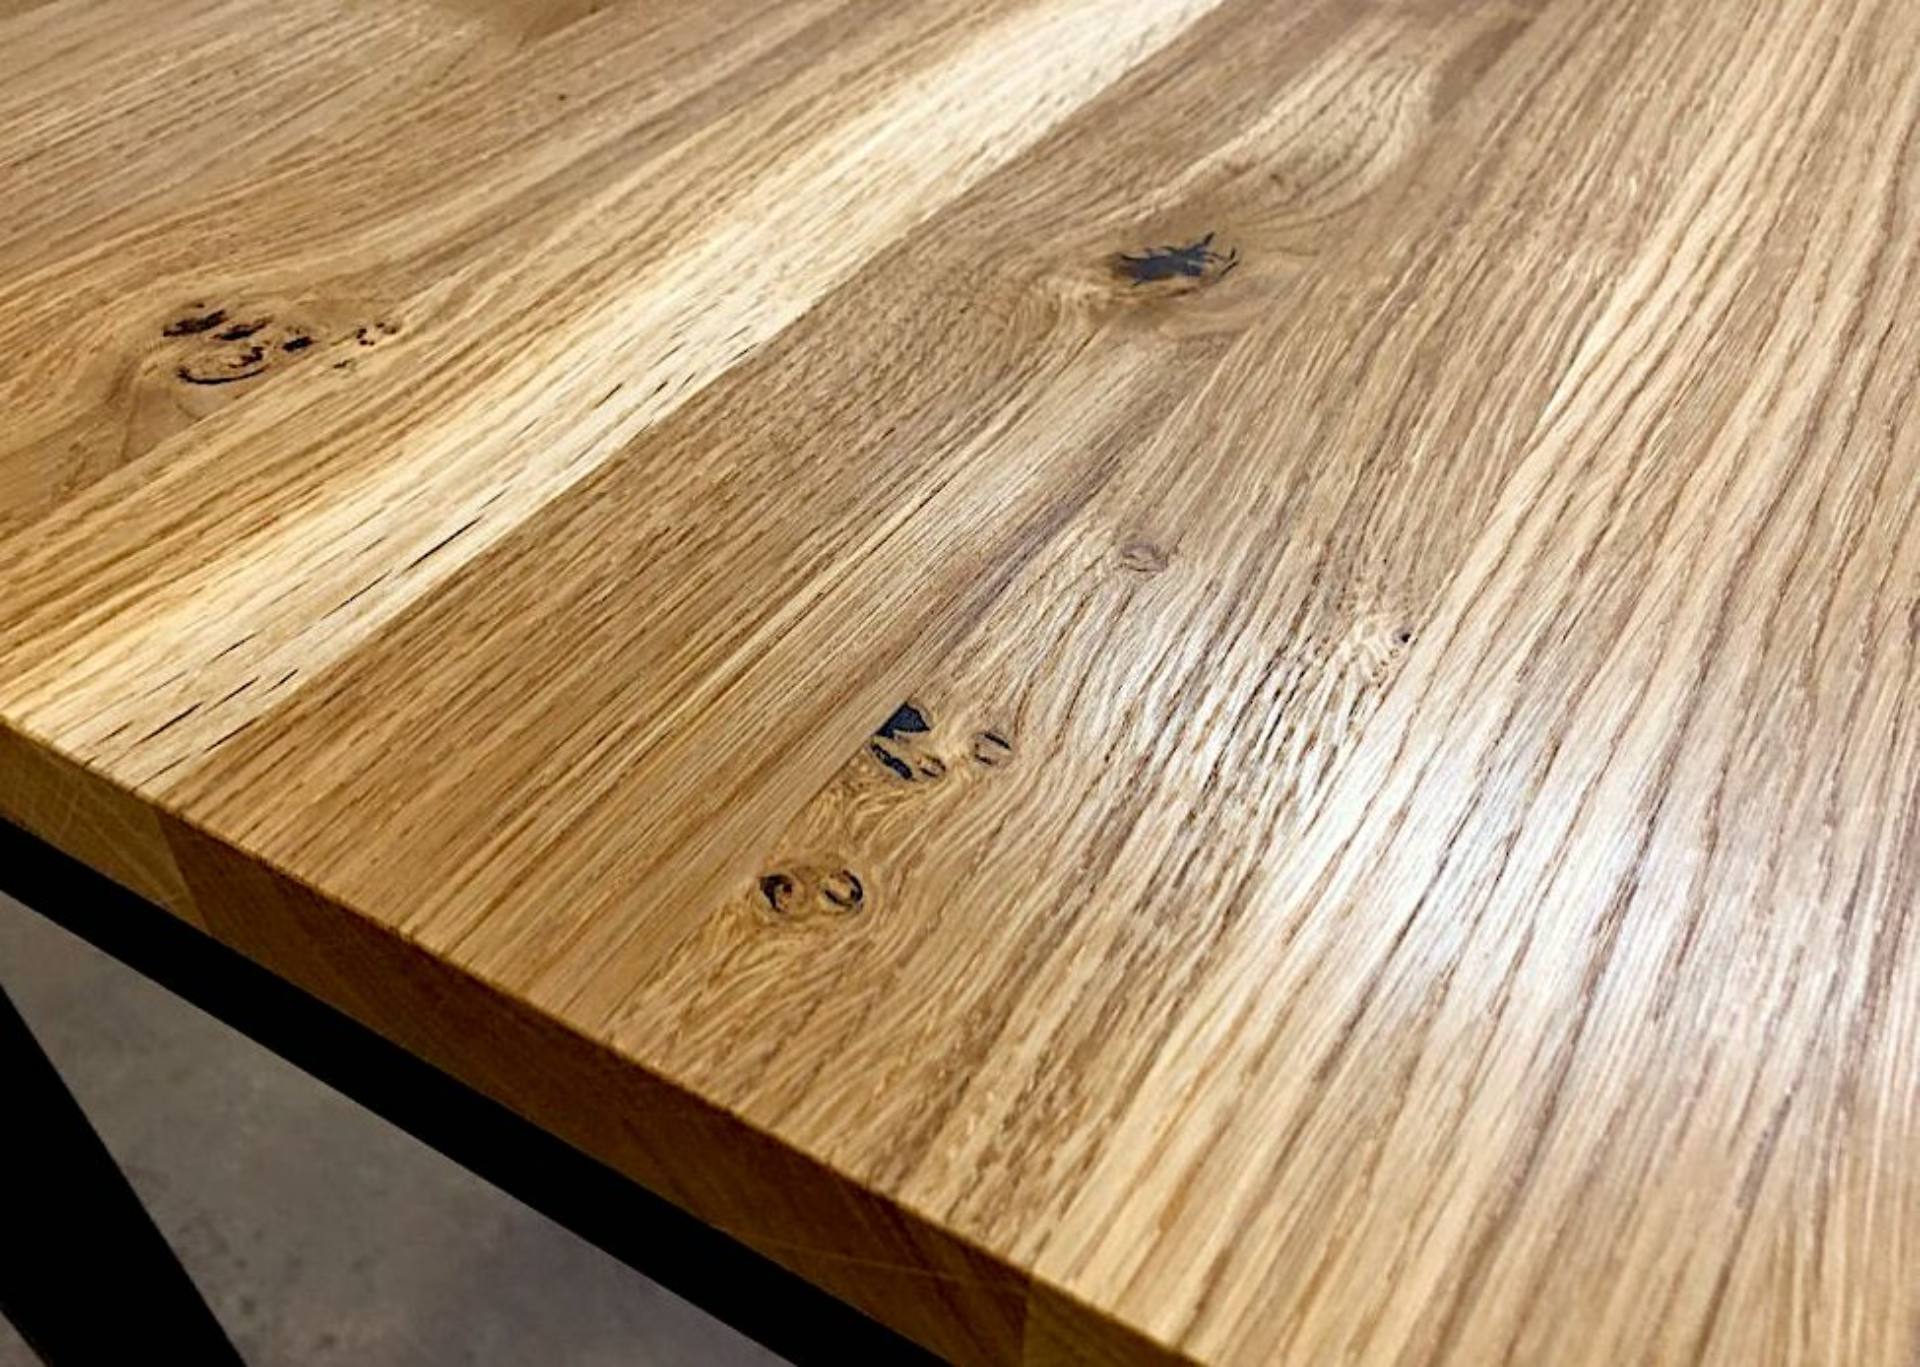  oak-table-wood-defects-Black-Forest